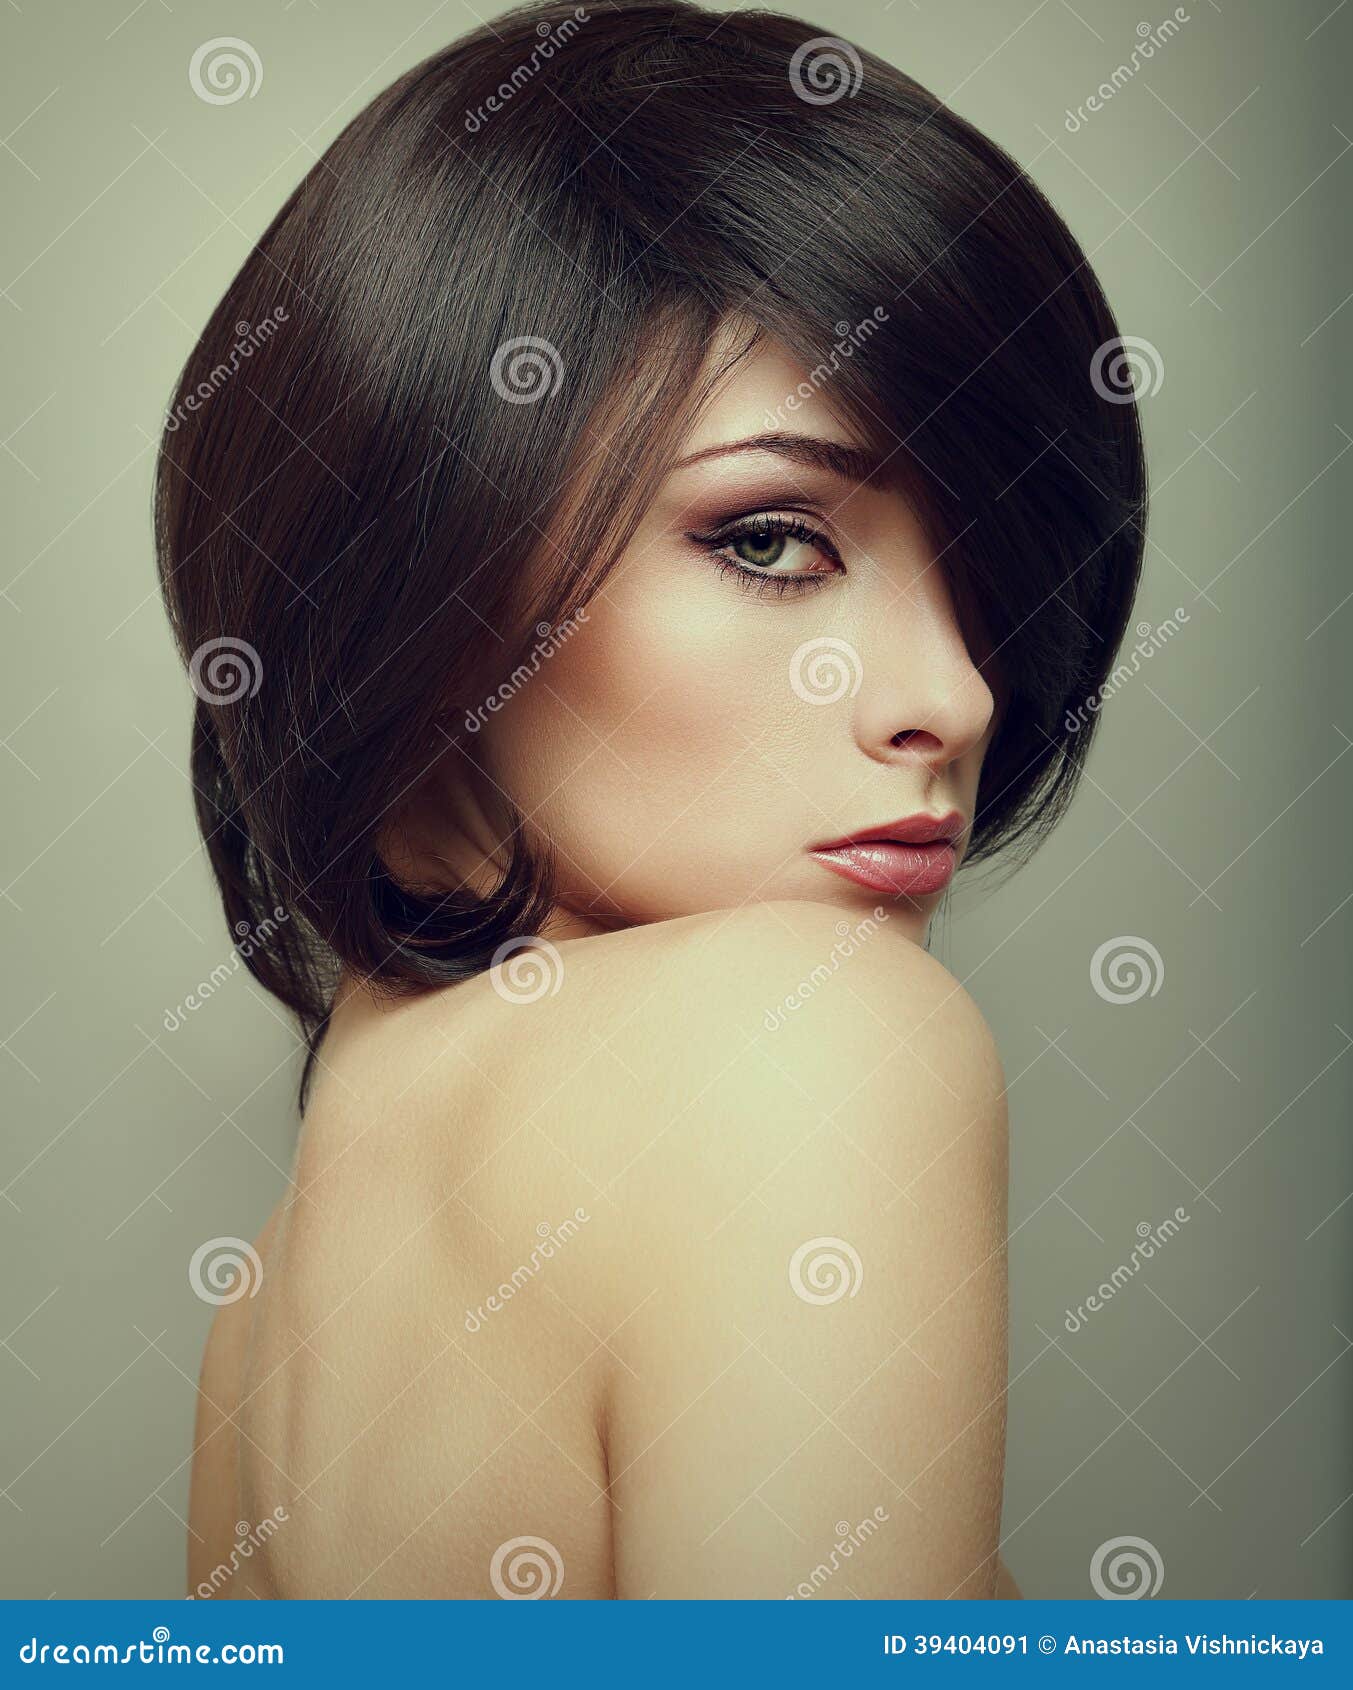 vogue portrait of alluring woman with short hair